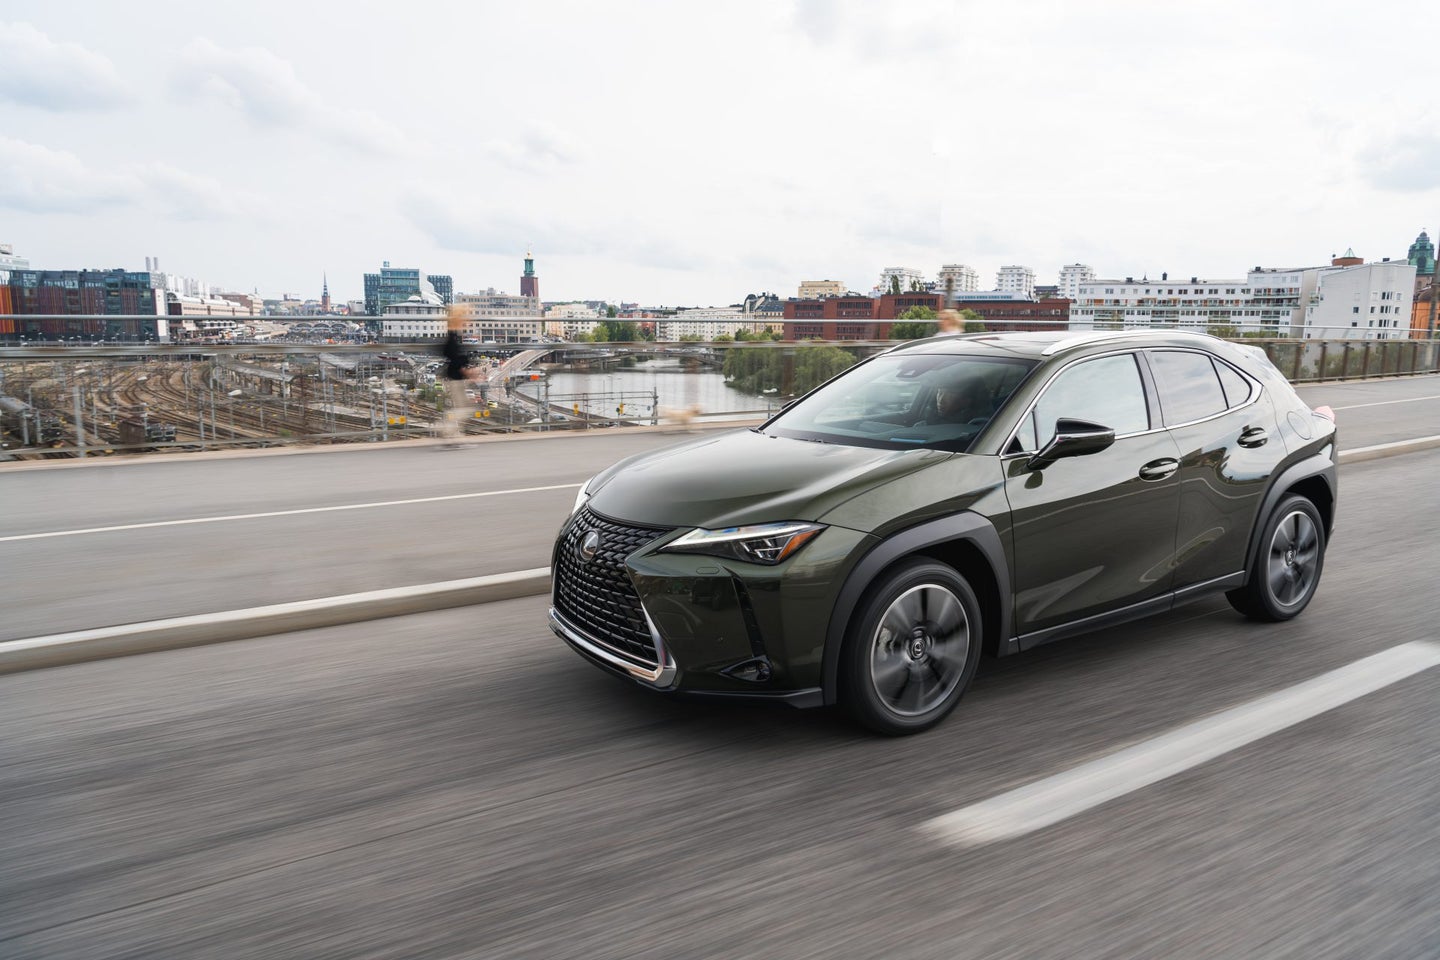 The 2019 Lexus UX 200 and UX 250h First Drive Review: A Small, Smart, Nimble City Specialist